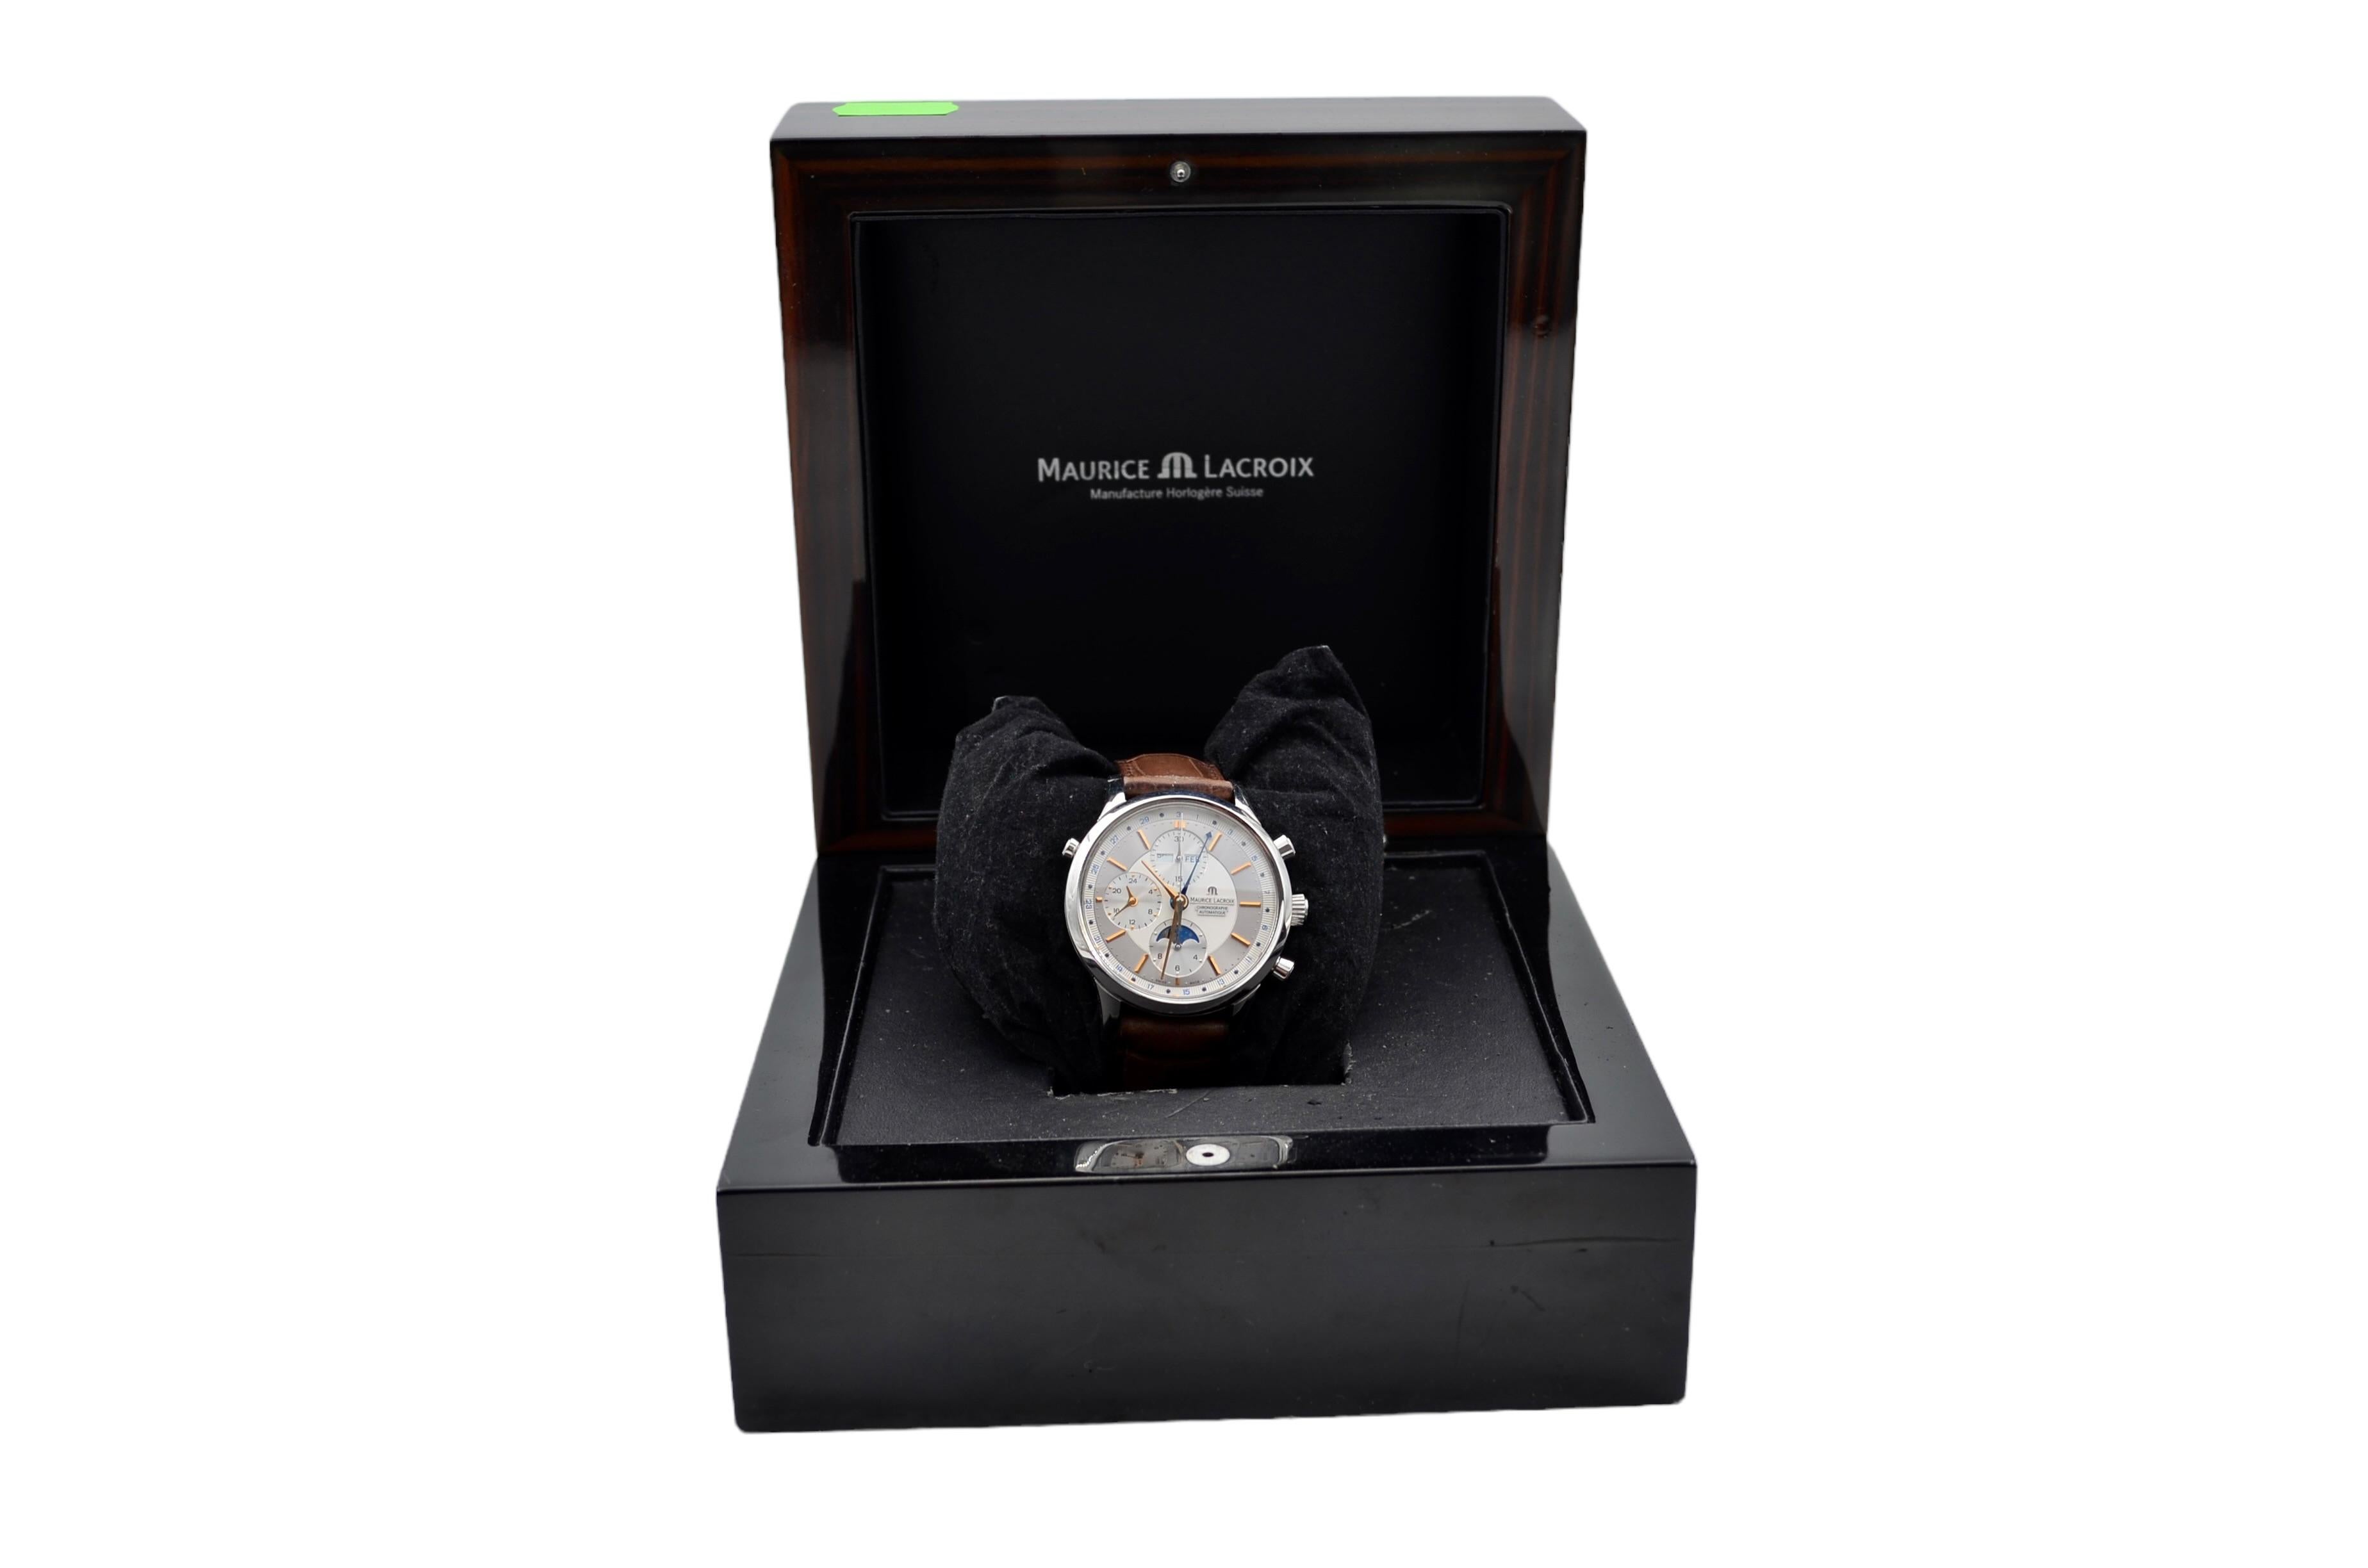 The watch is in a very good condition and it’s working well. The total lenght of the bracelet (case+bracelet) is between 15-20cm.  The watch comes with the original box, along with an AGS Jewelry warranty card. For more information about delivery,